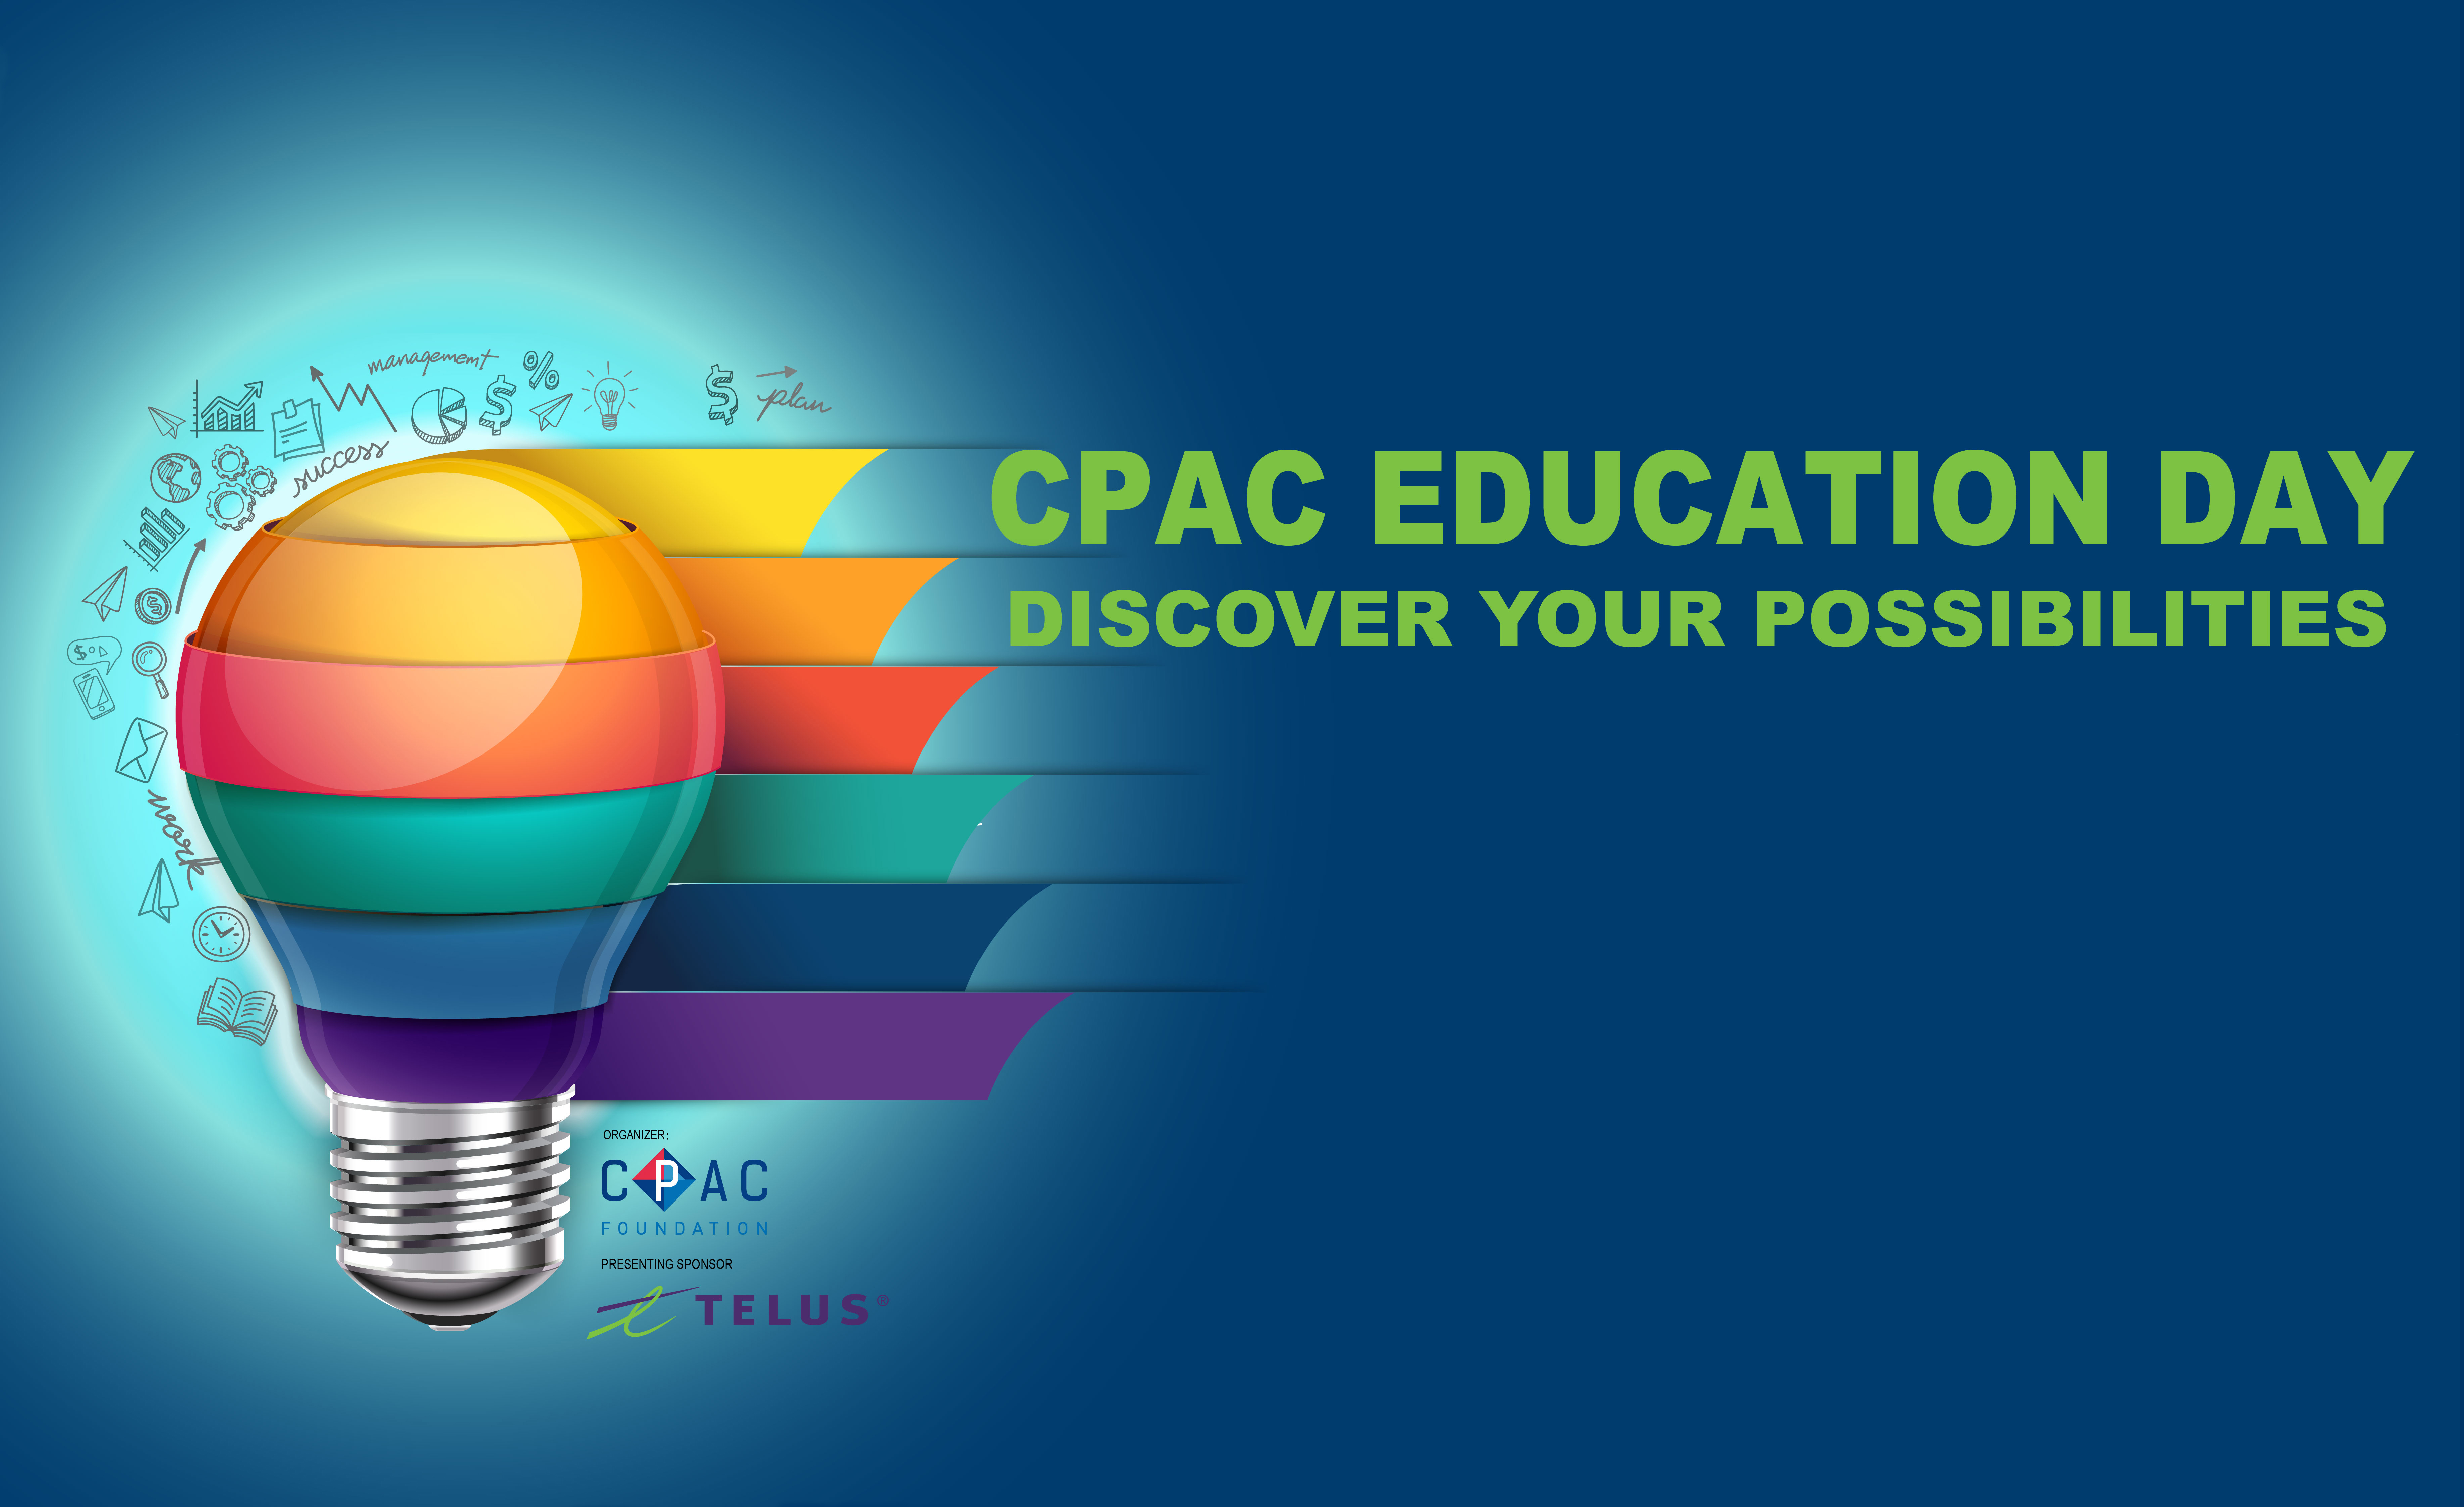 CPAC Together, we define the future.